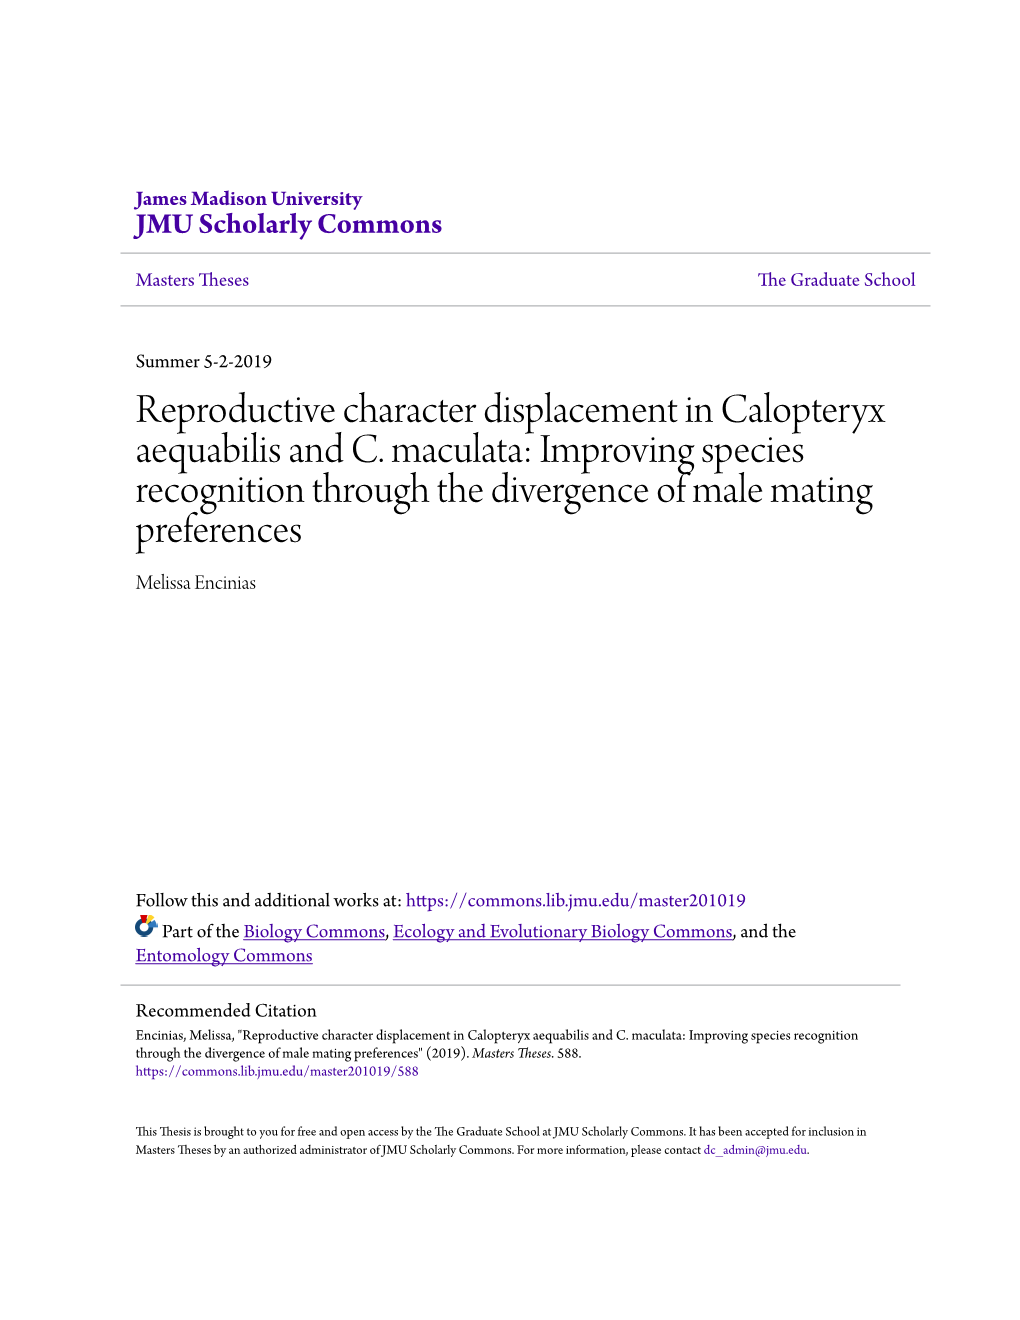 Reproductive Character Displacement in Calopteryx Aequabilis and C